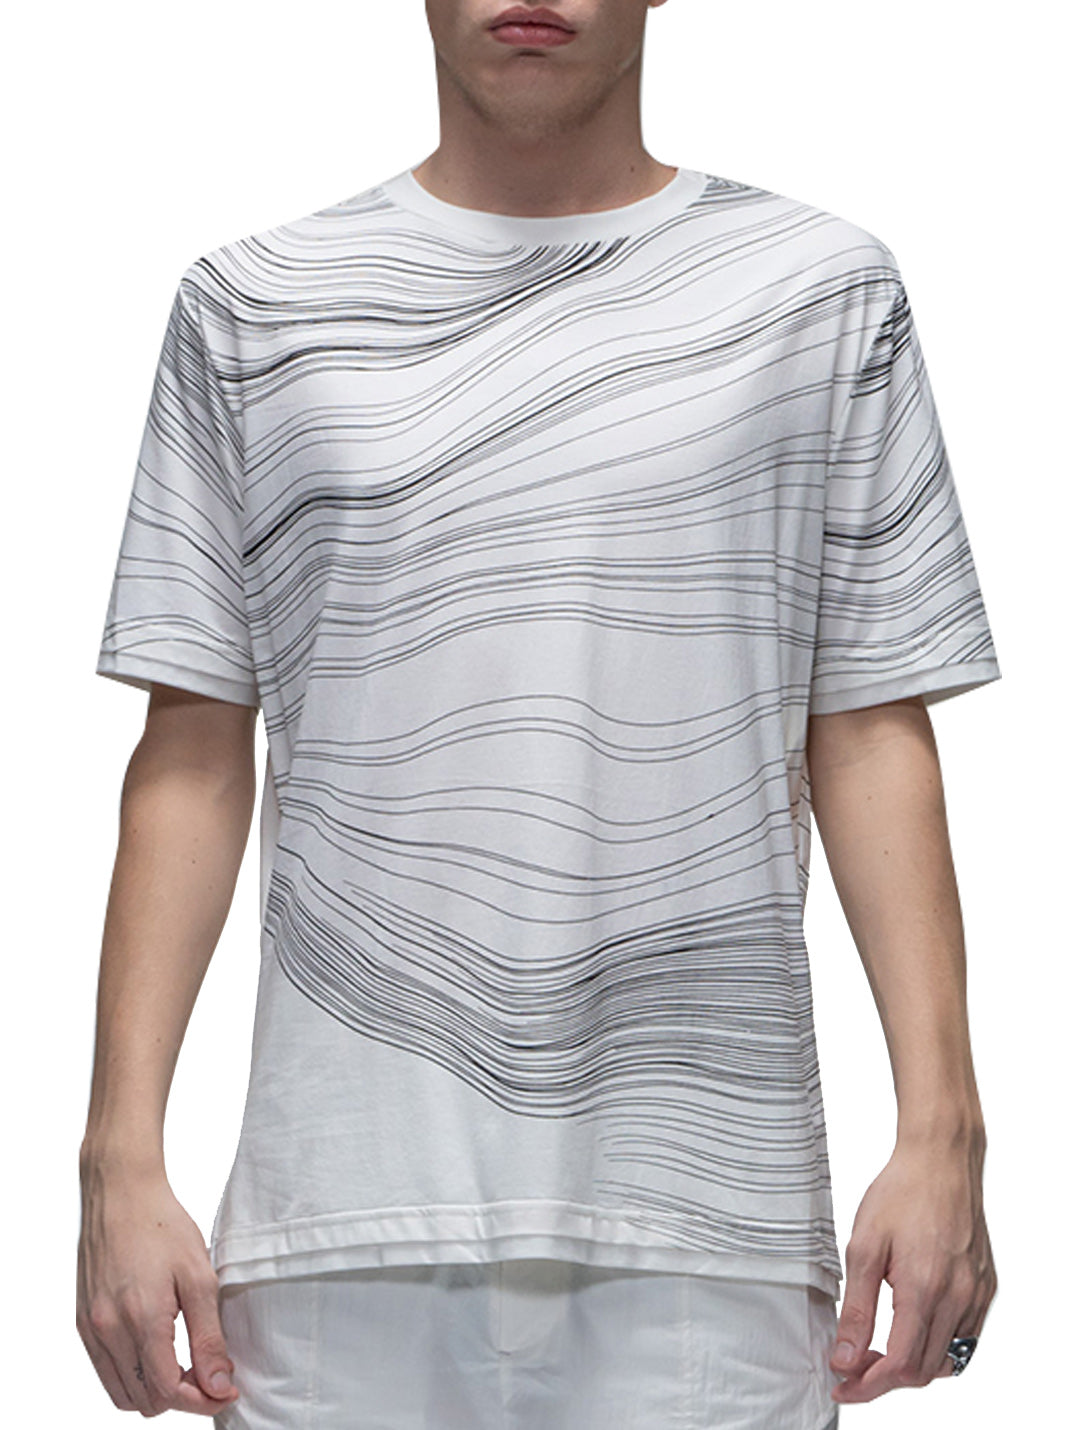 Harrison Wong-Tee With Contour Lines Print T-shirt Harrison Wong White M 